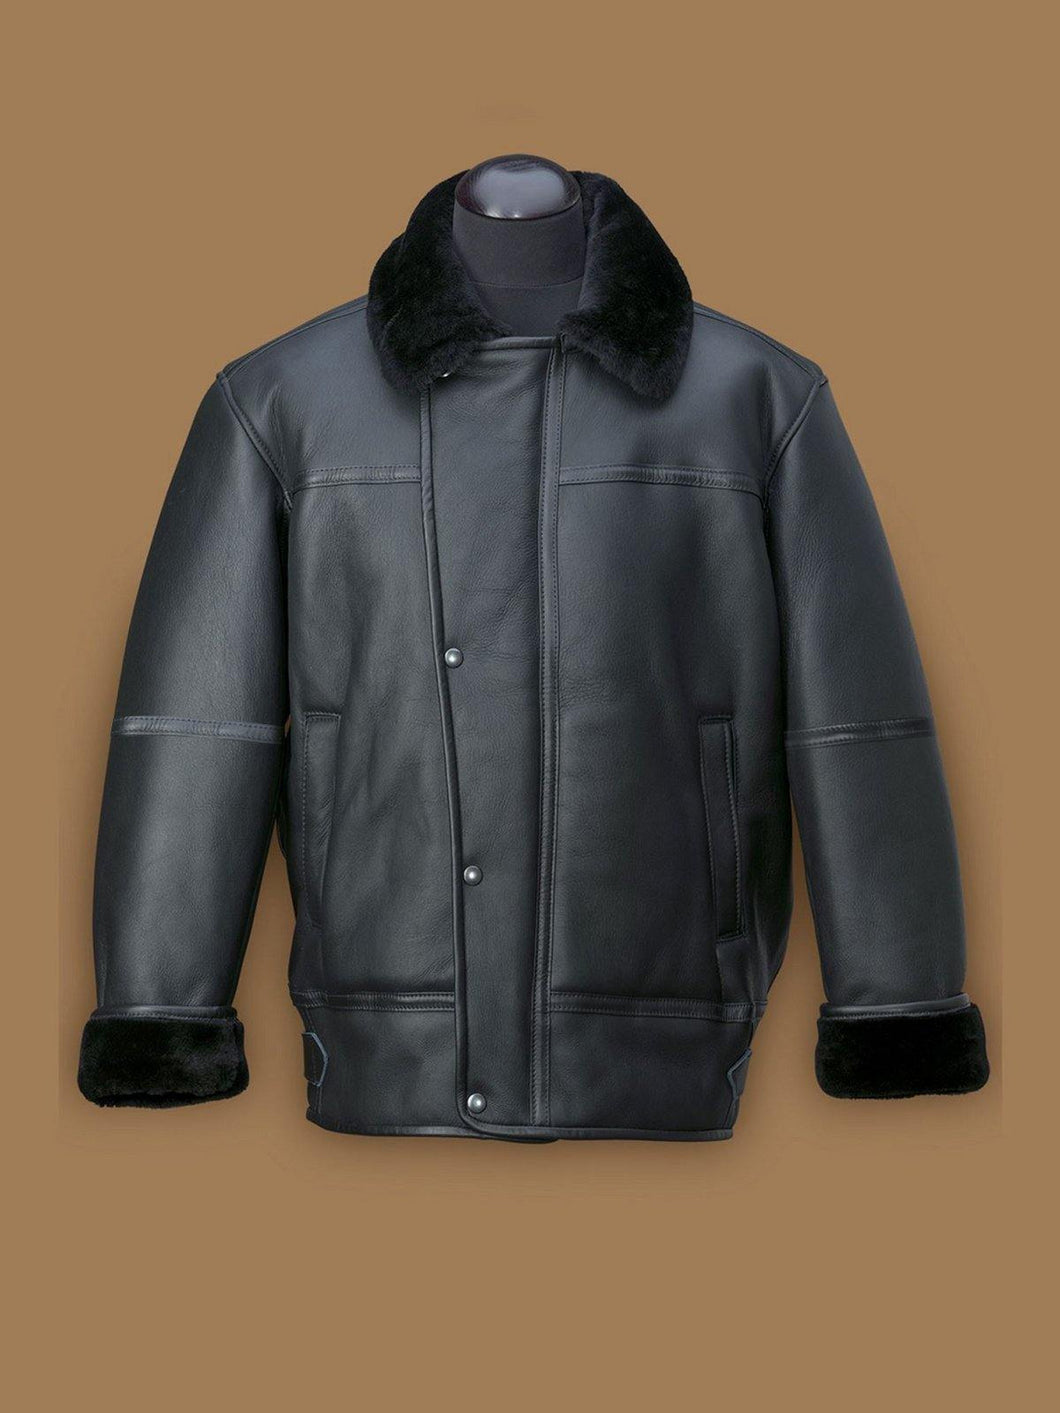 Men Black Aircraft Shearling Bomber Leather Jacket - Shearling leather